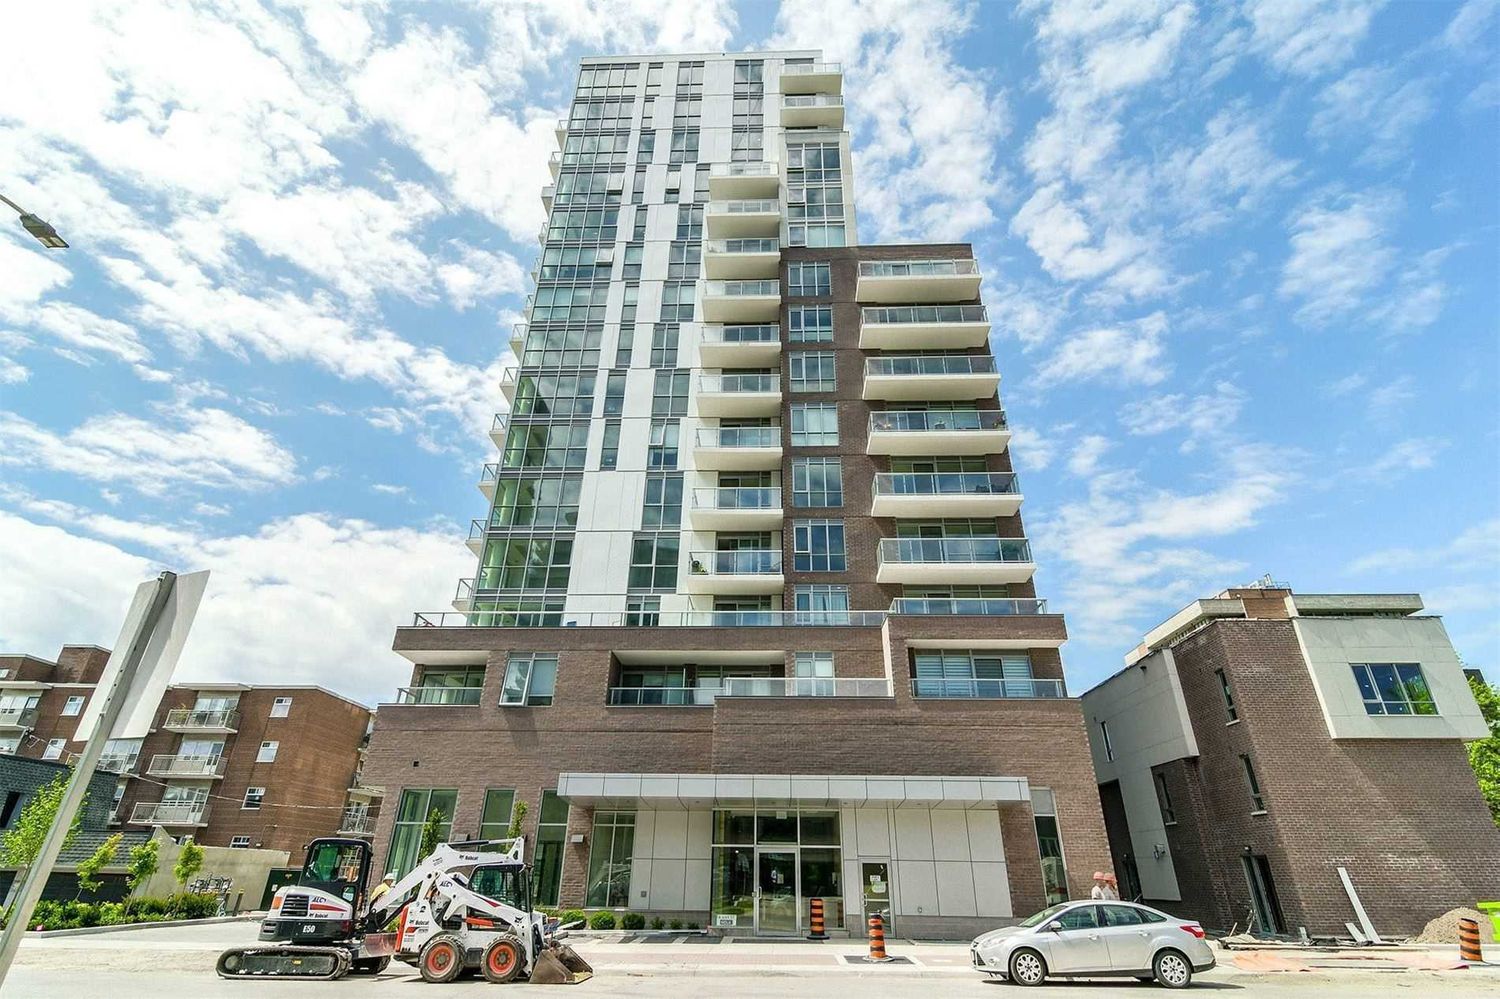 8 Ann Street. NOLA Condos is located in  Mississauga, Toronto - image #2 of 2